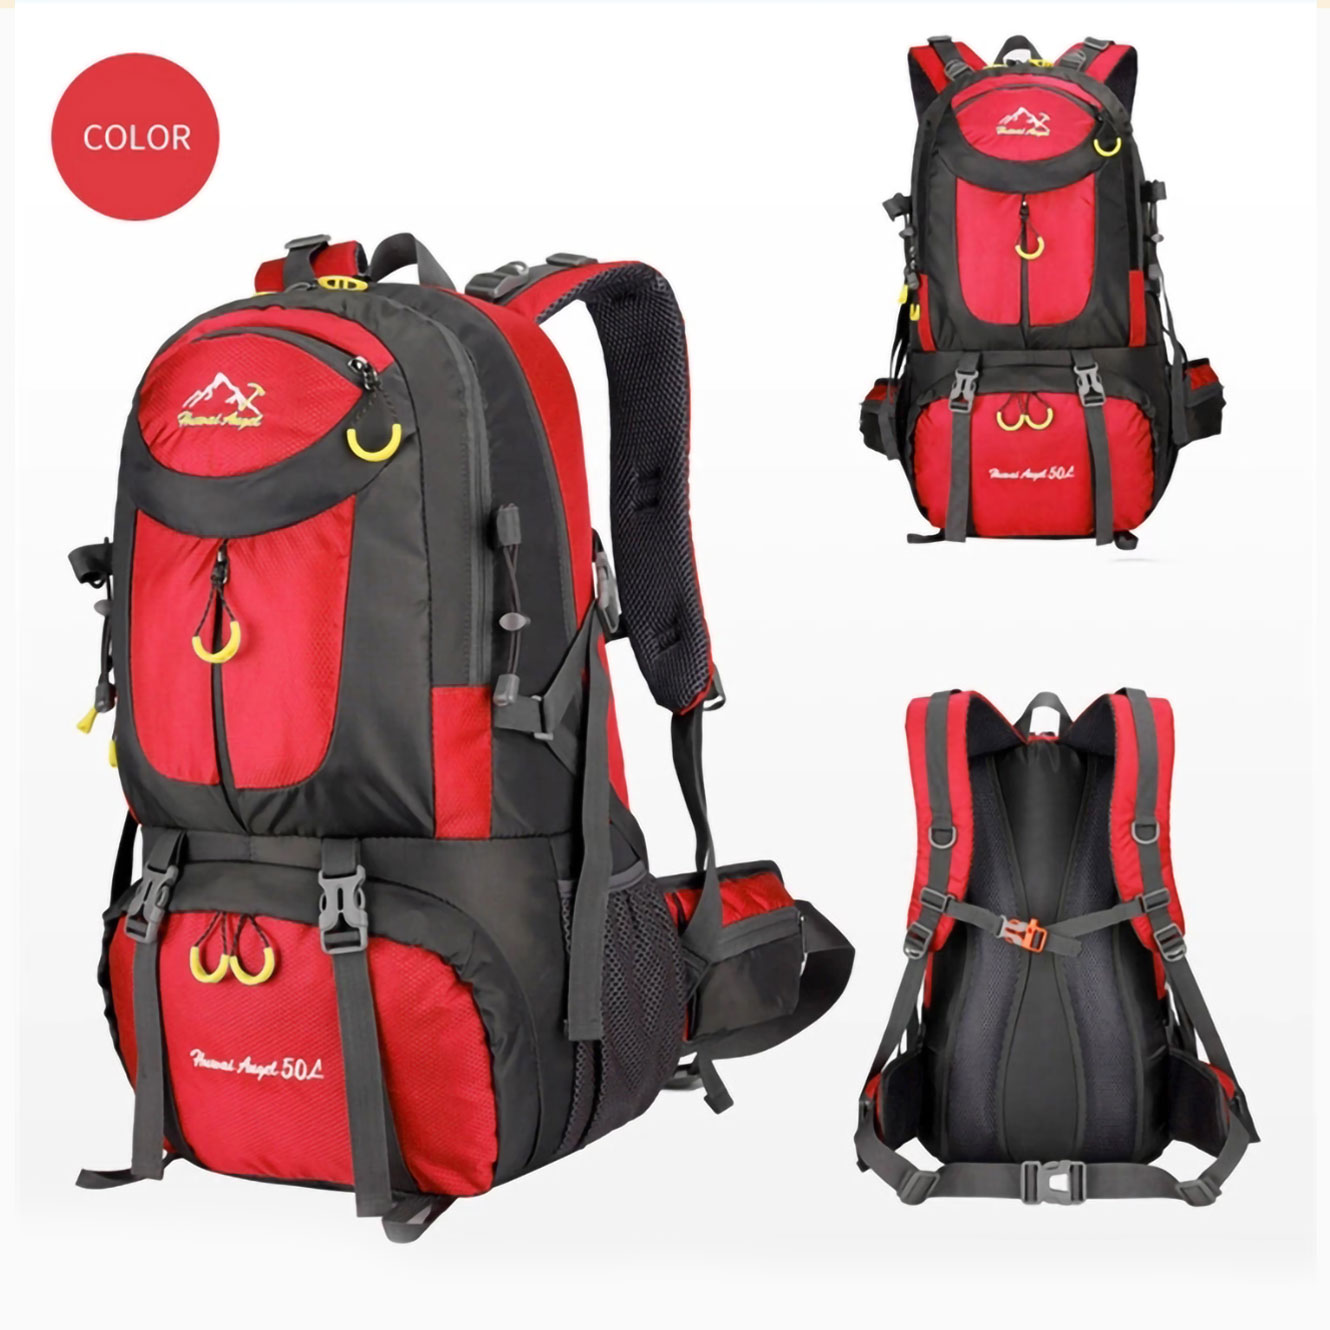 Traveling Water Resistant 40L/50L/60L Outdoor Hiking Backpack - Big ...